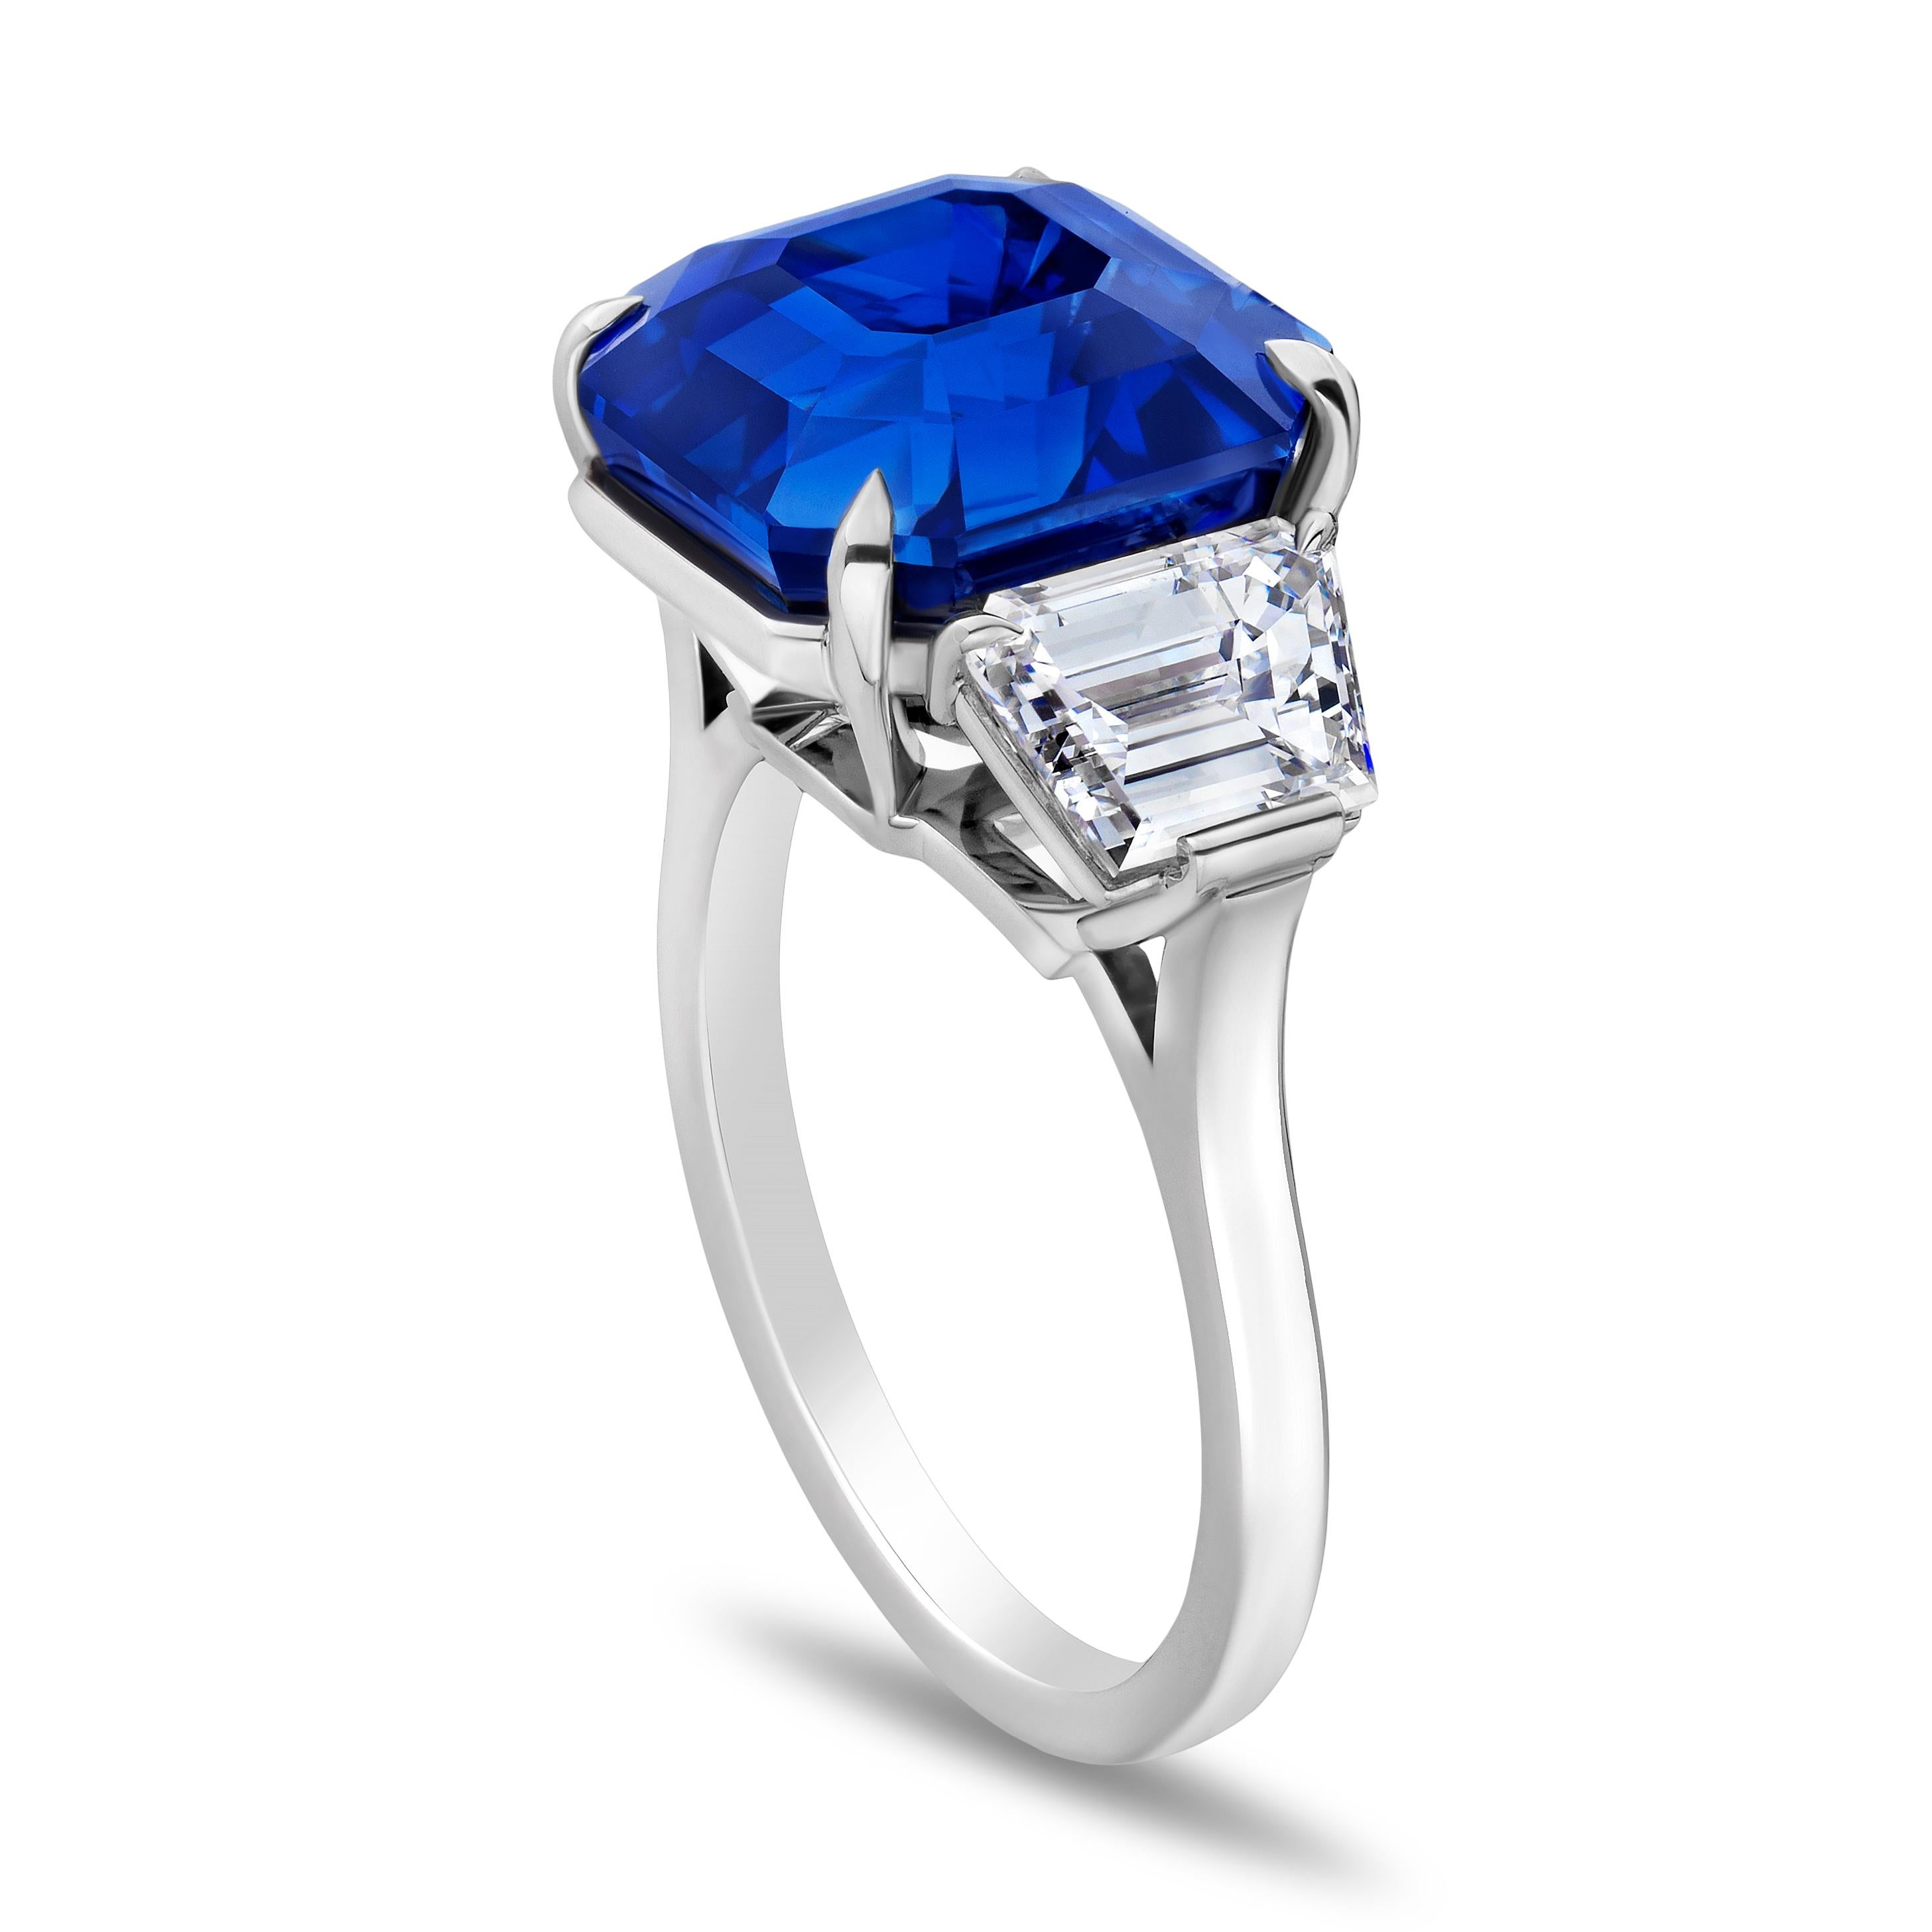 11.08 carat Square Emerald Blue Sapphire with two Trapezoid Step Cut Diamonds 1.94 carats set in a handmade Platinum ring